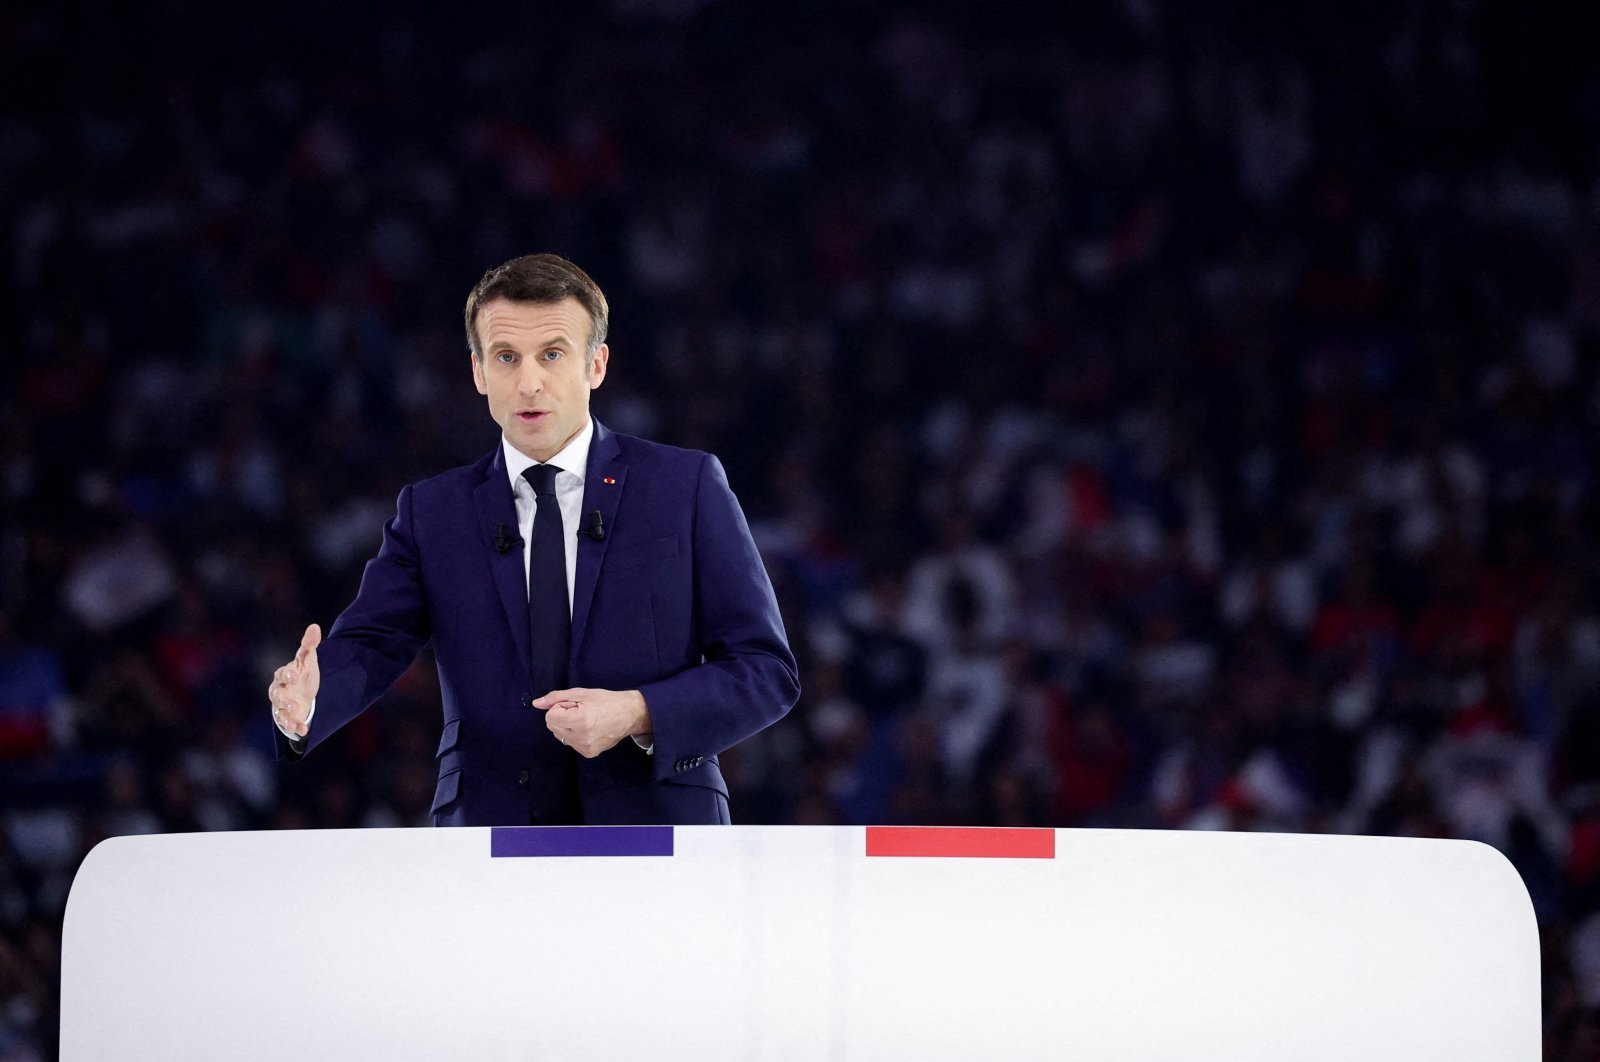 French President Emmanuel Macron, candidate for his reelection in the 2022 French presidential election, attends a political campaign rally at Paris La Defense Arena in Nanterre, France, April 2, 2022. (Reuters Photo)